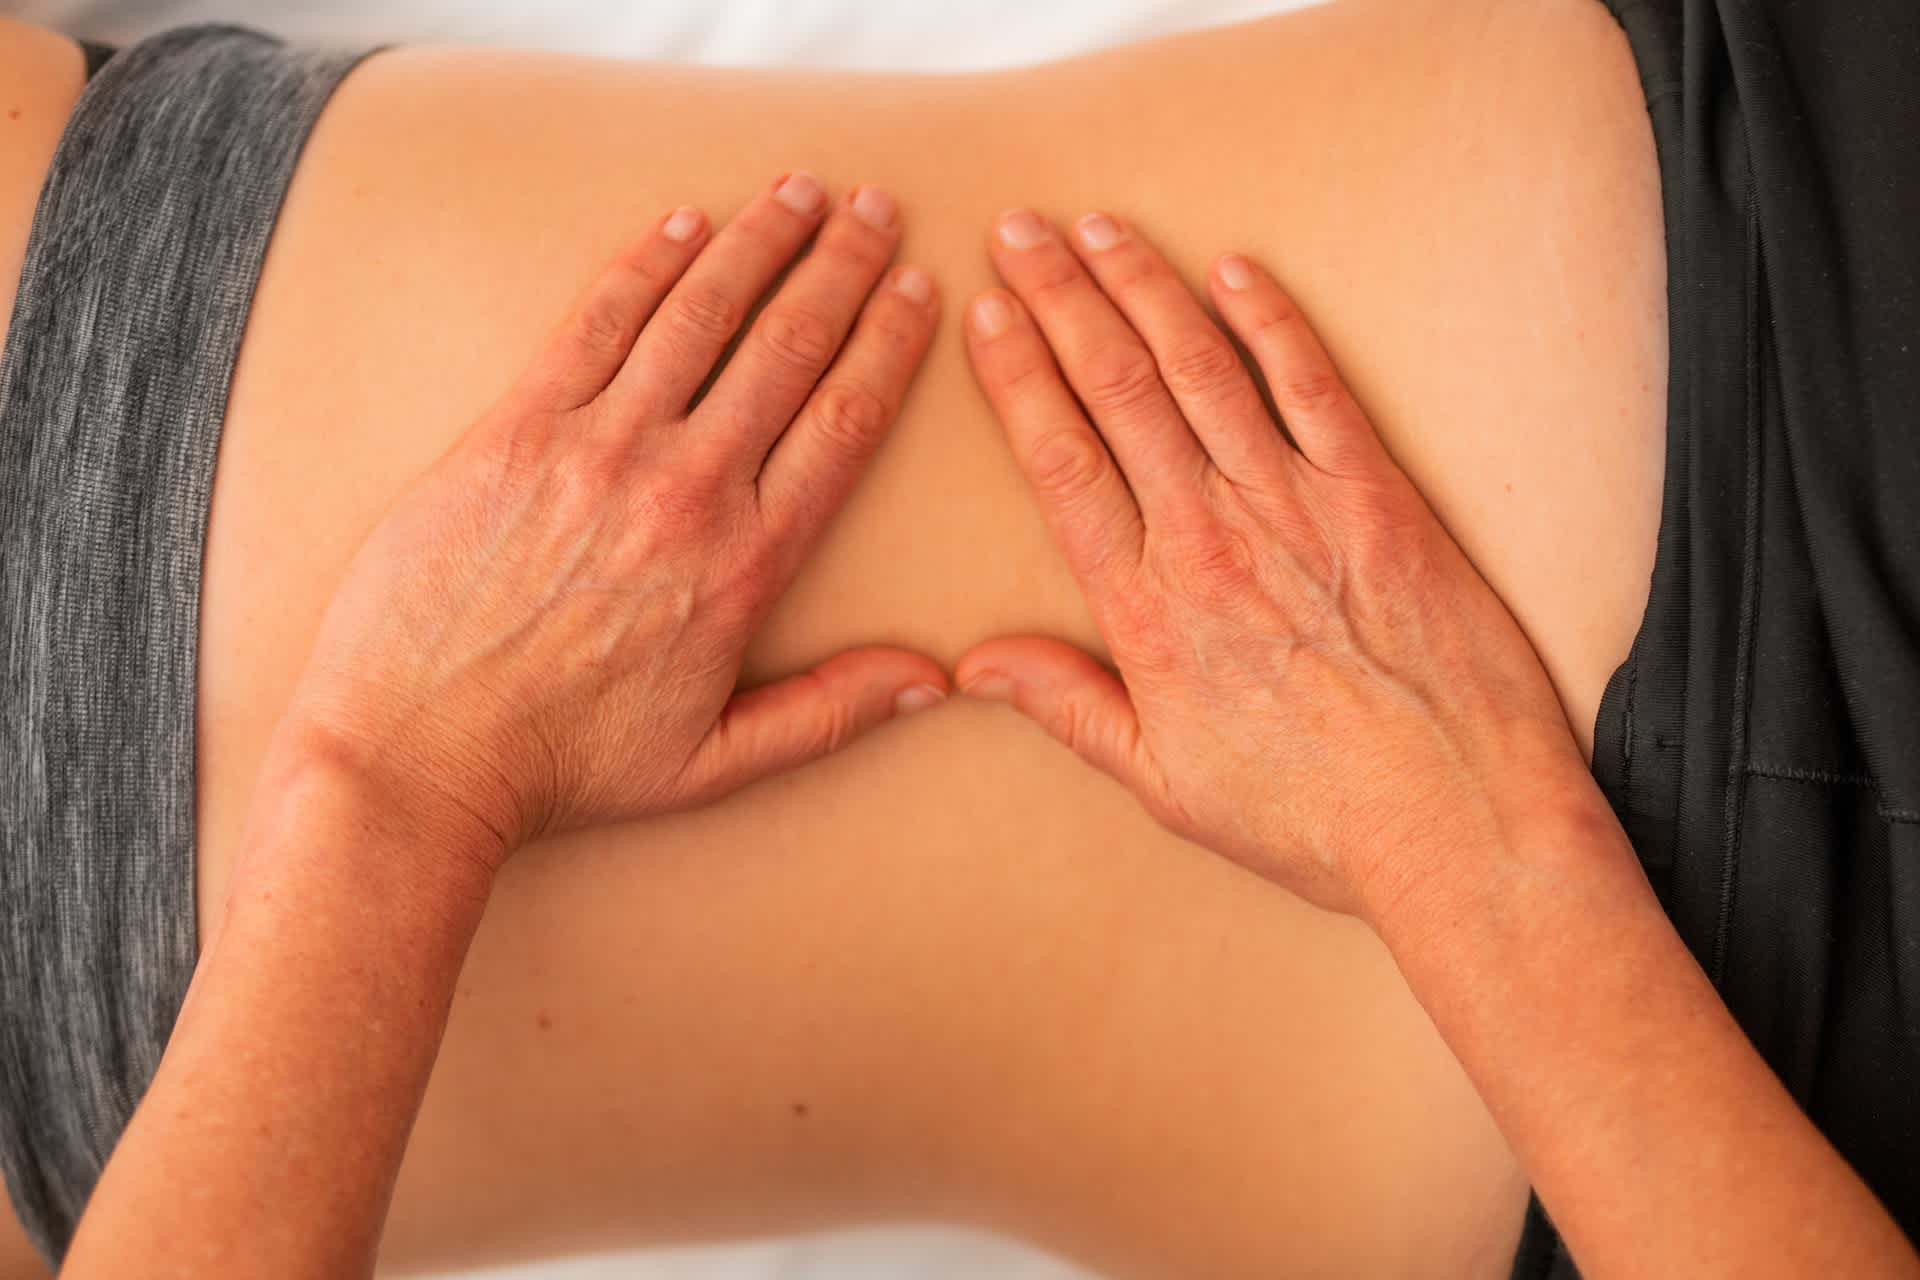 What Type of Massage Is Best for Back Pain?